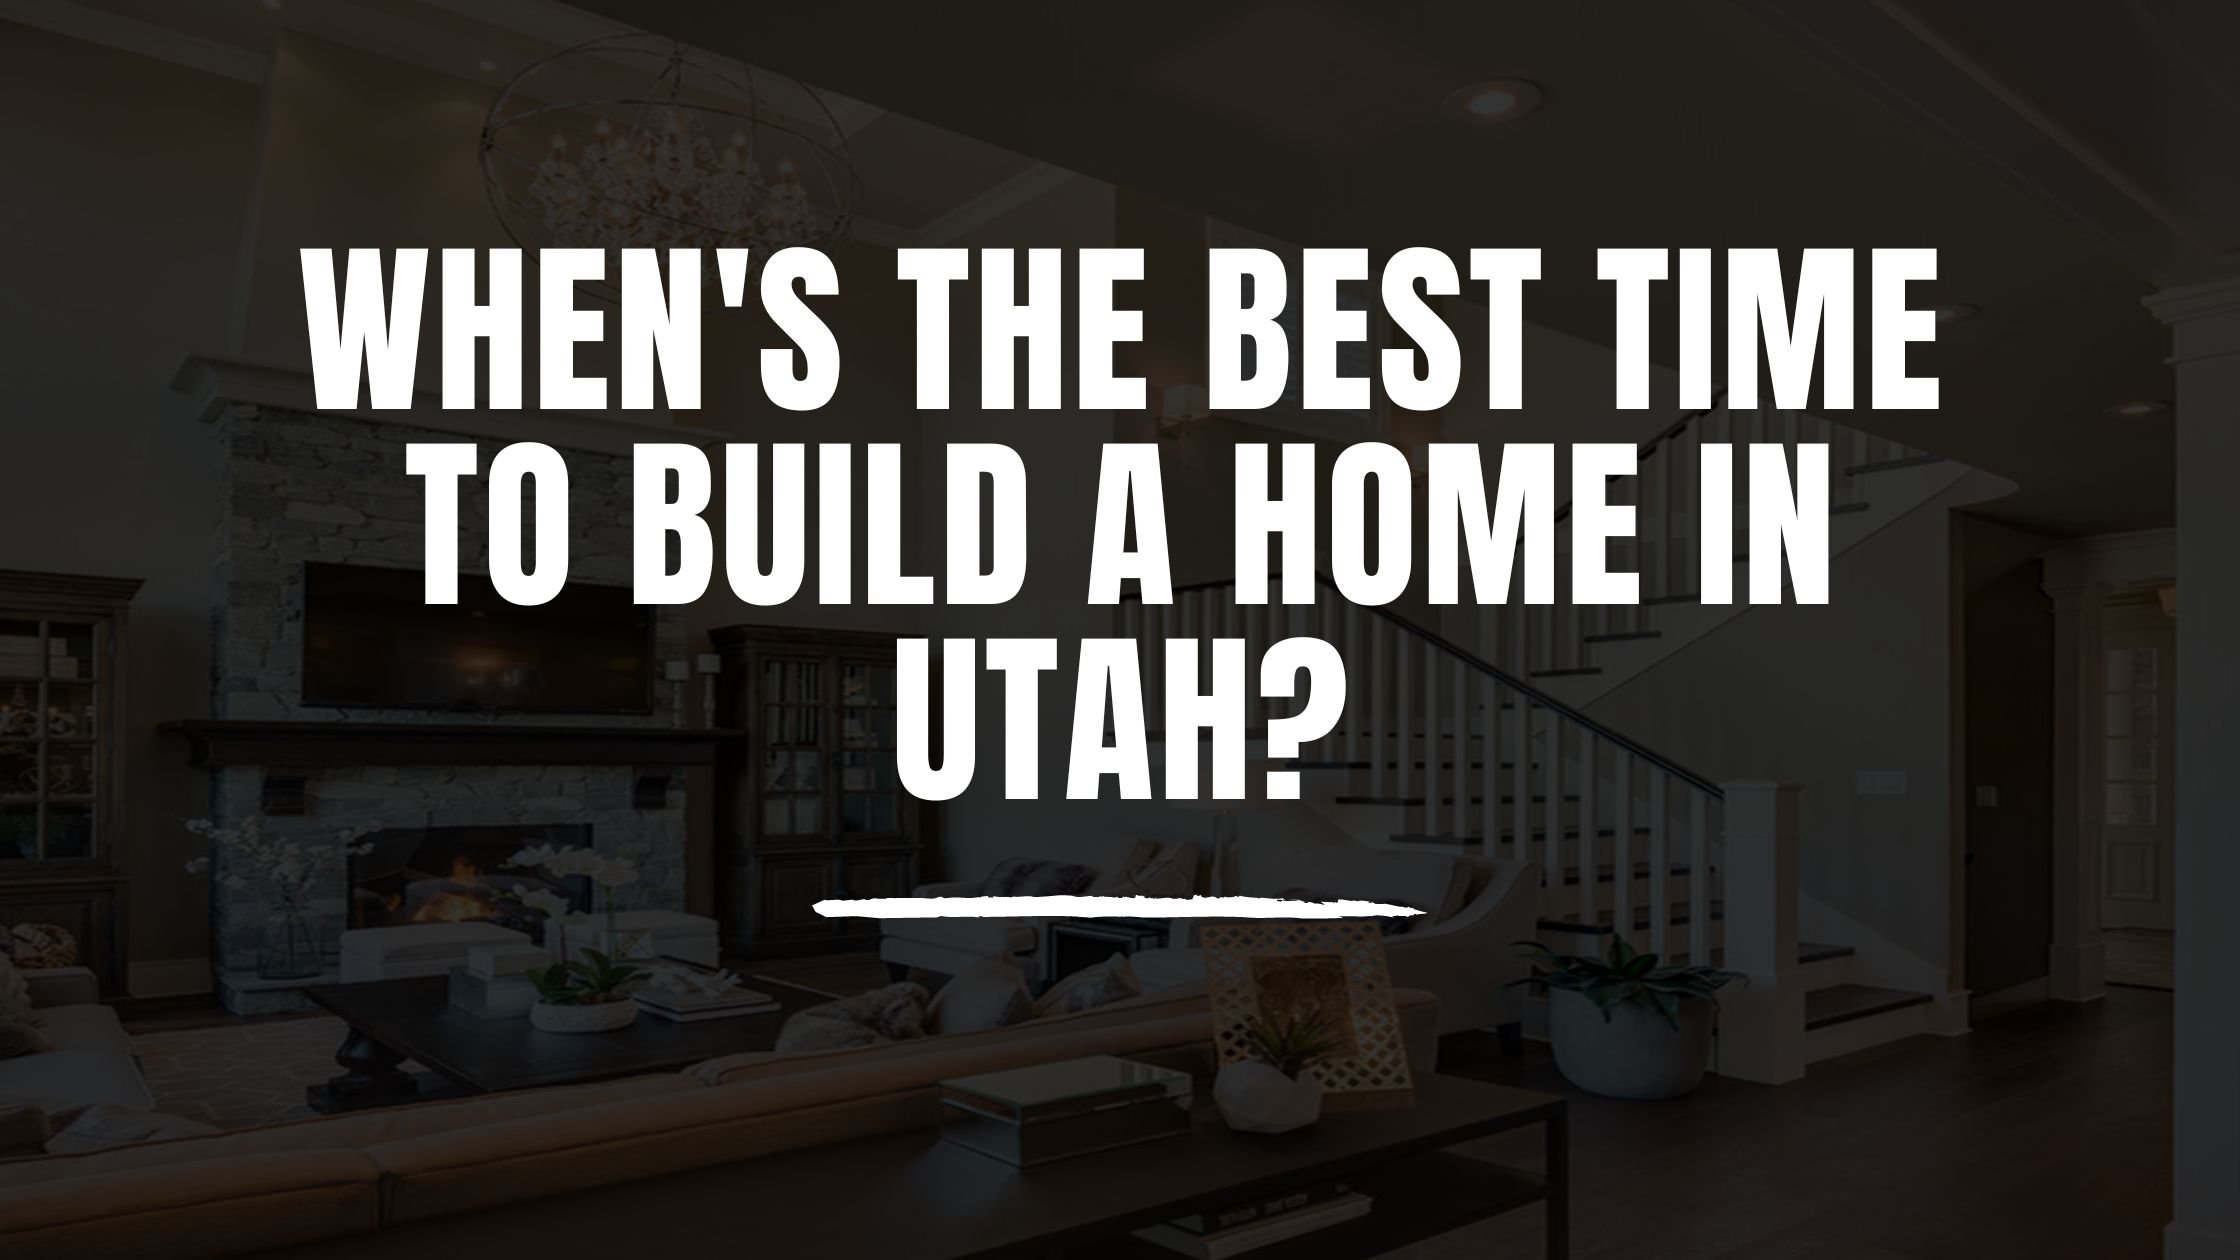 When's the Best Time to Build a Home in Utah?